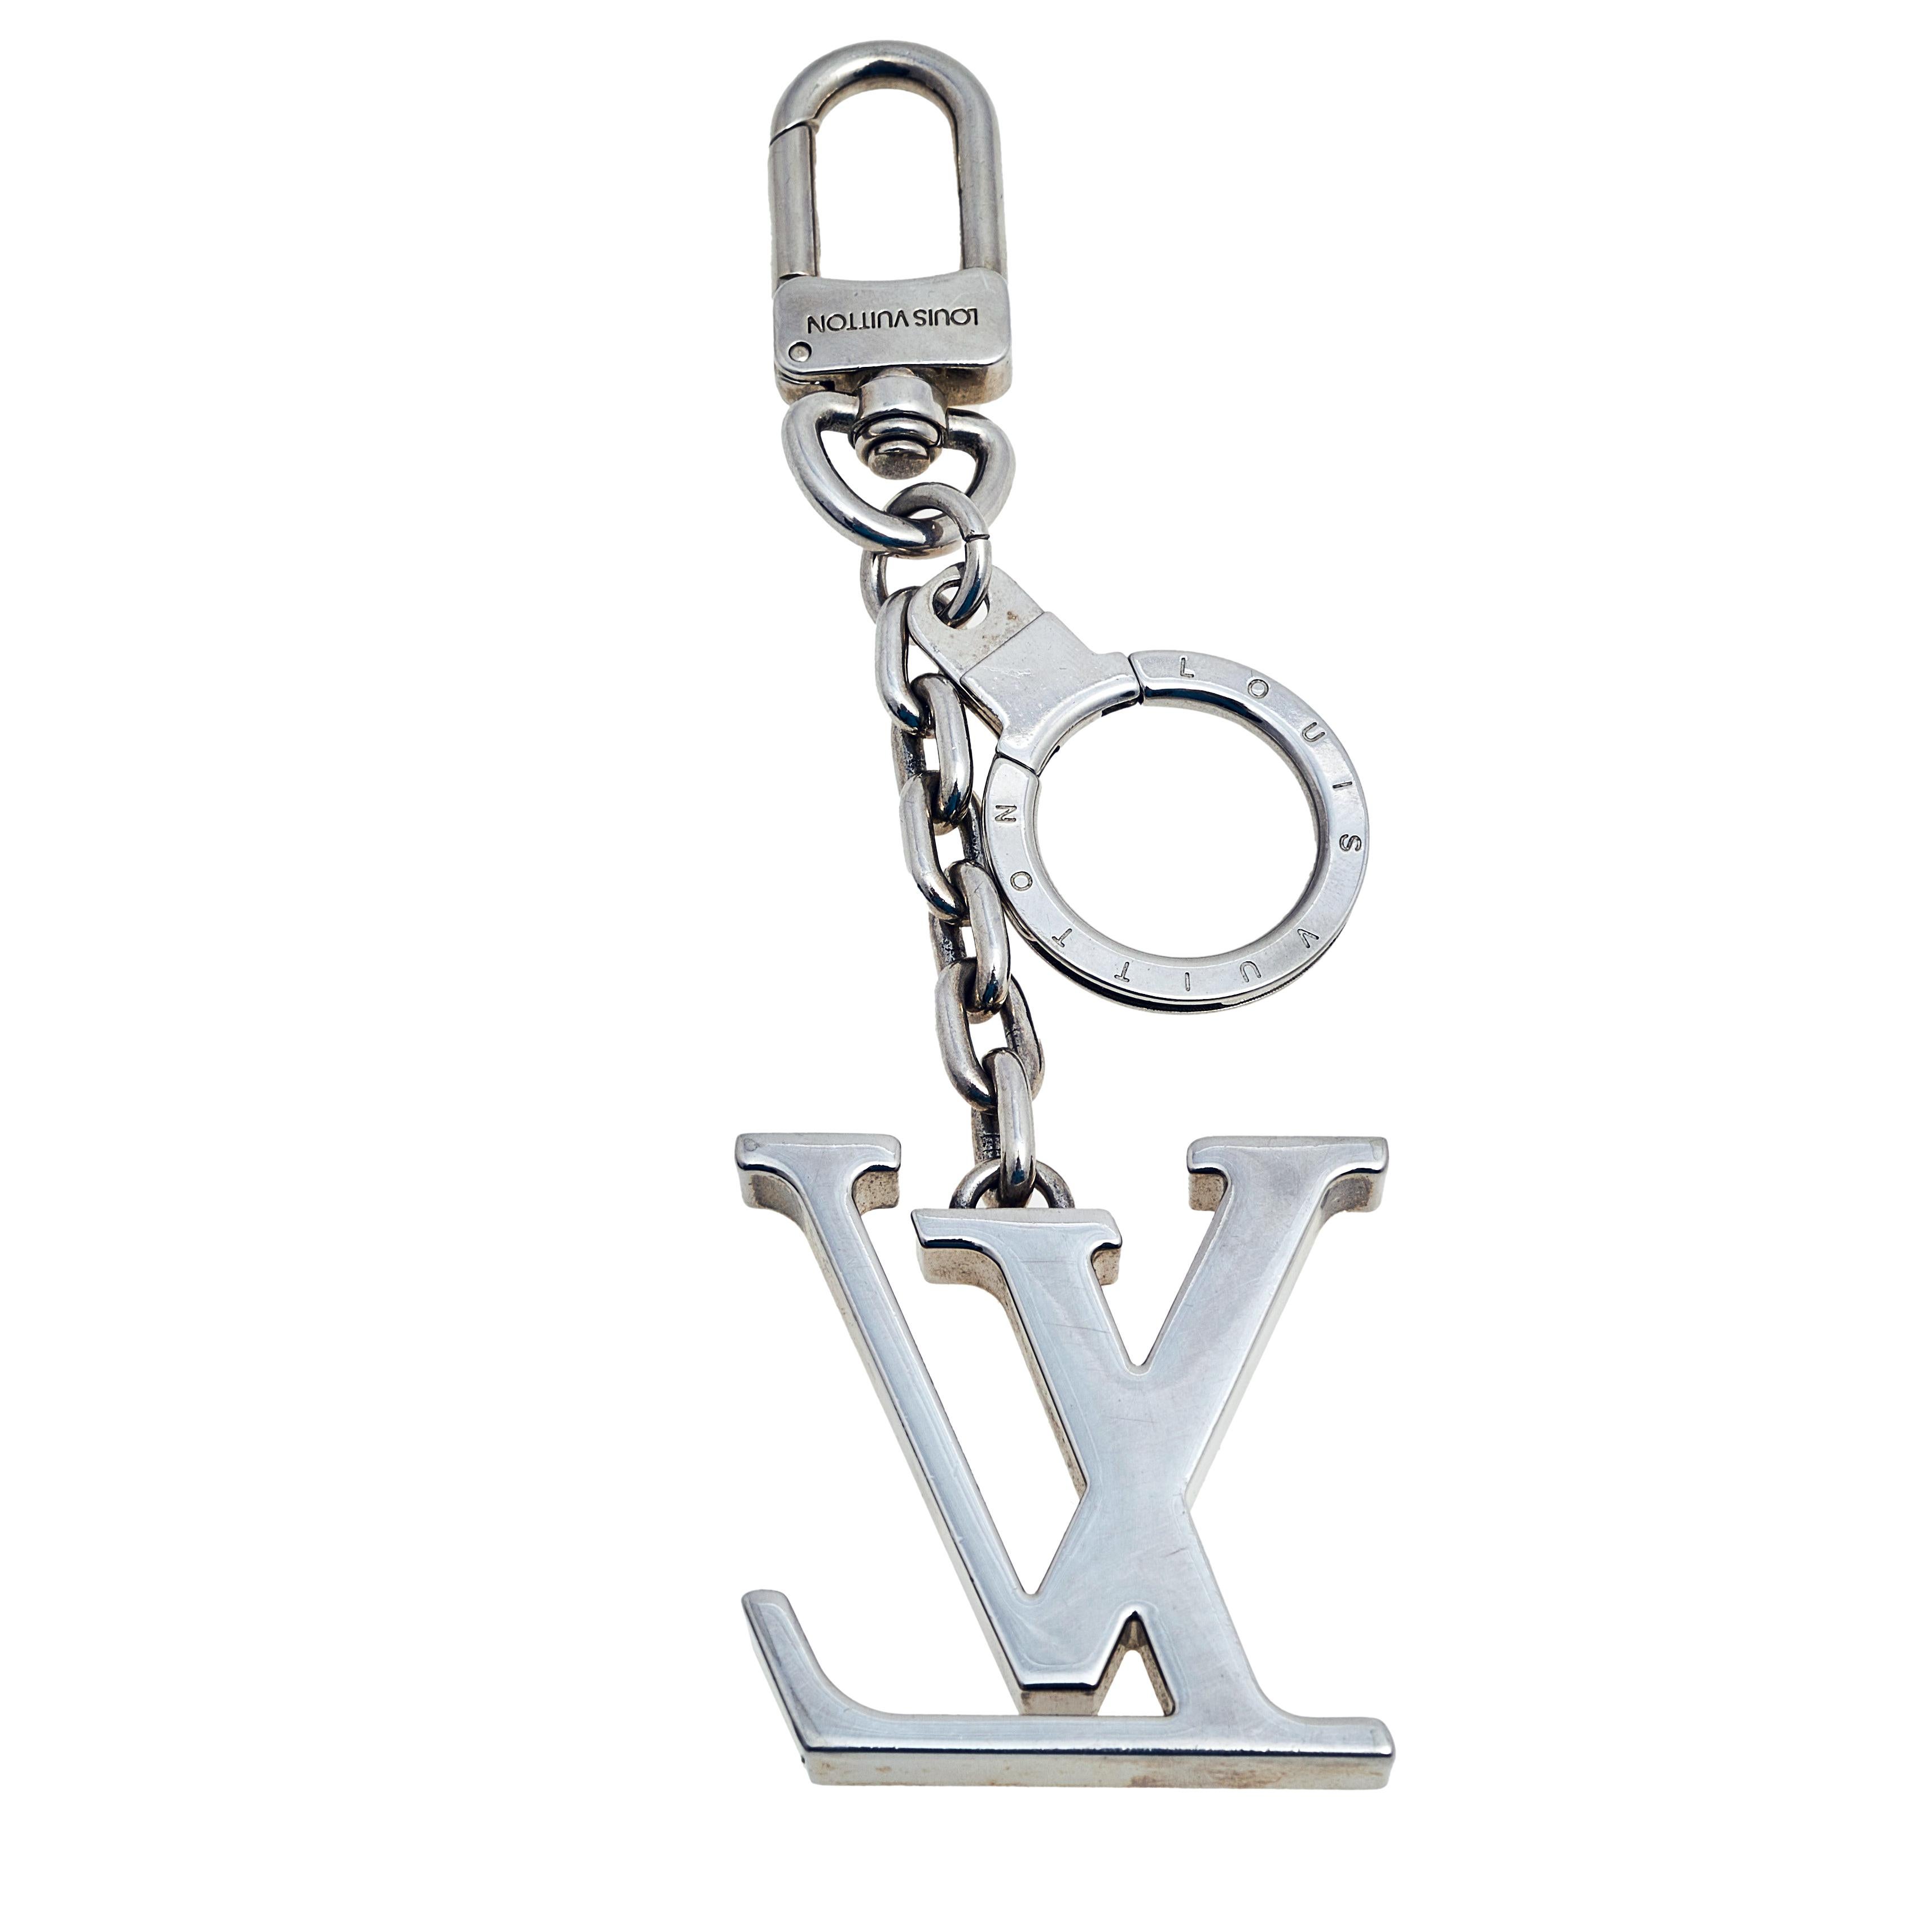 With its elegant faceted design and engraved with the LV initials, the Louis Vuitton Facettes key holder and bag charm will complement most of your handbags. They have been crafted from silver-tone metal and feature a clasp closure.